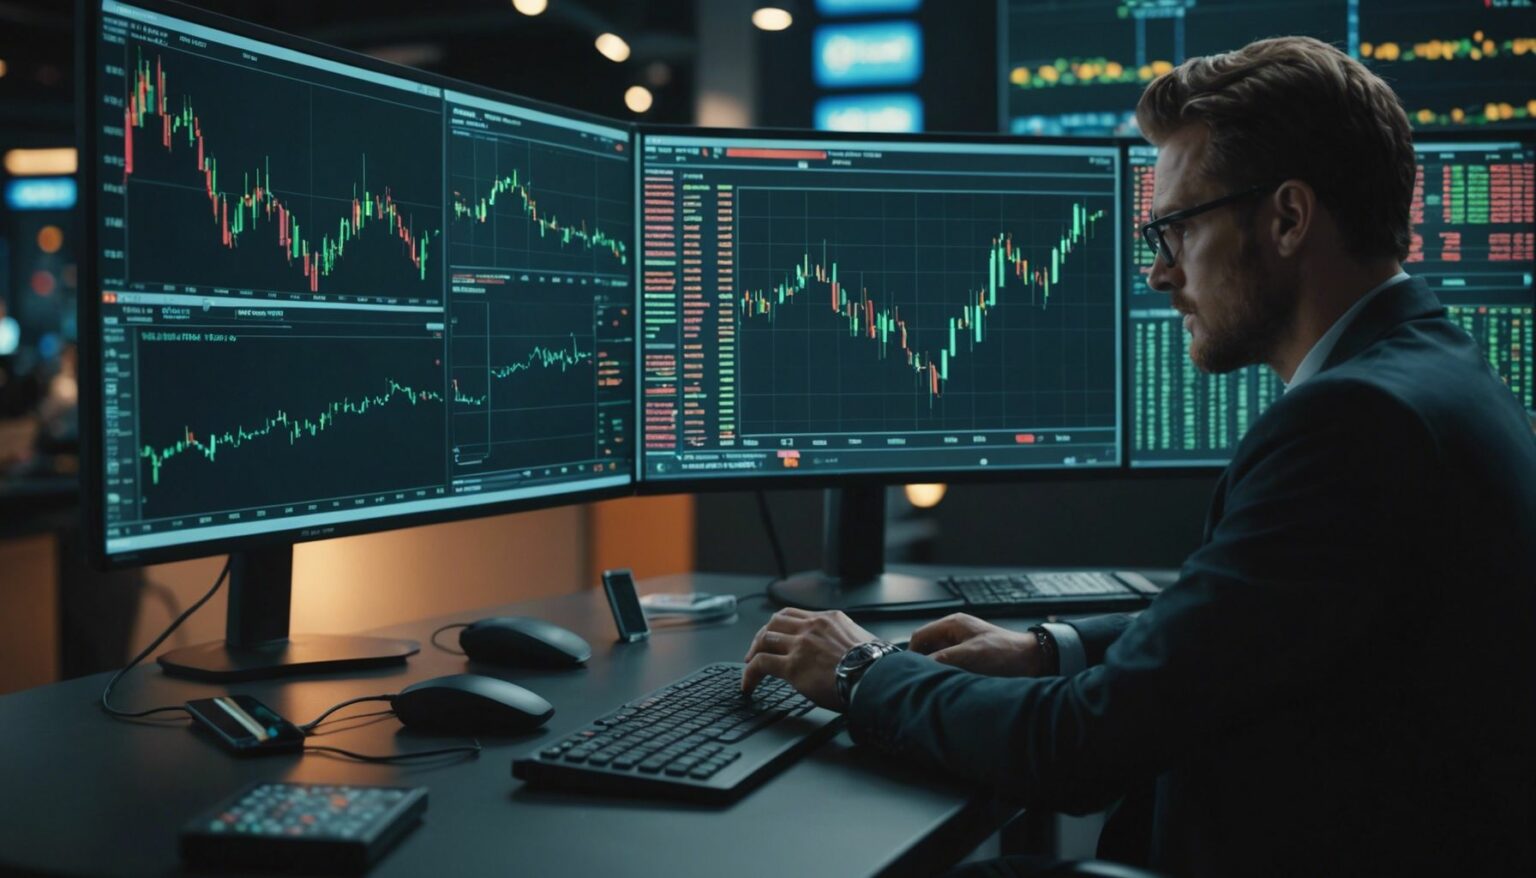 Futuristic trading interface with candlestick charts, cryptocurrency symbols, and a trader analyzing data on a holographic screen.